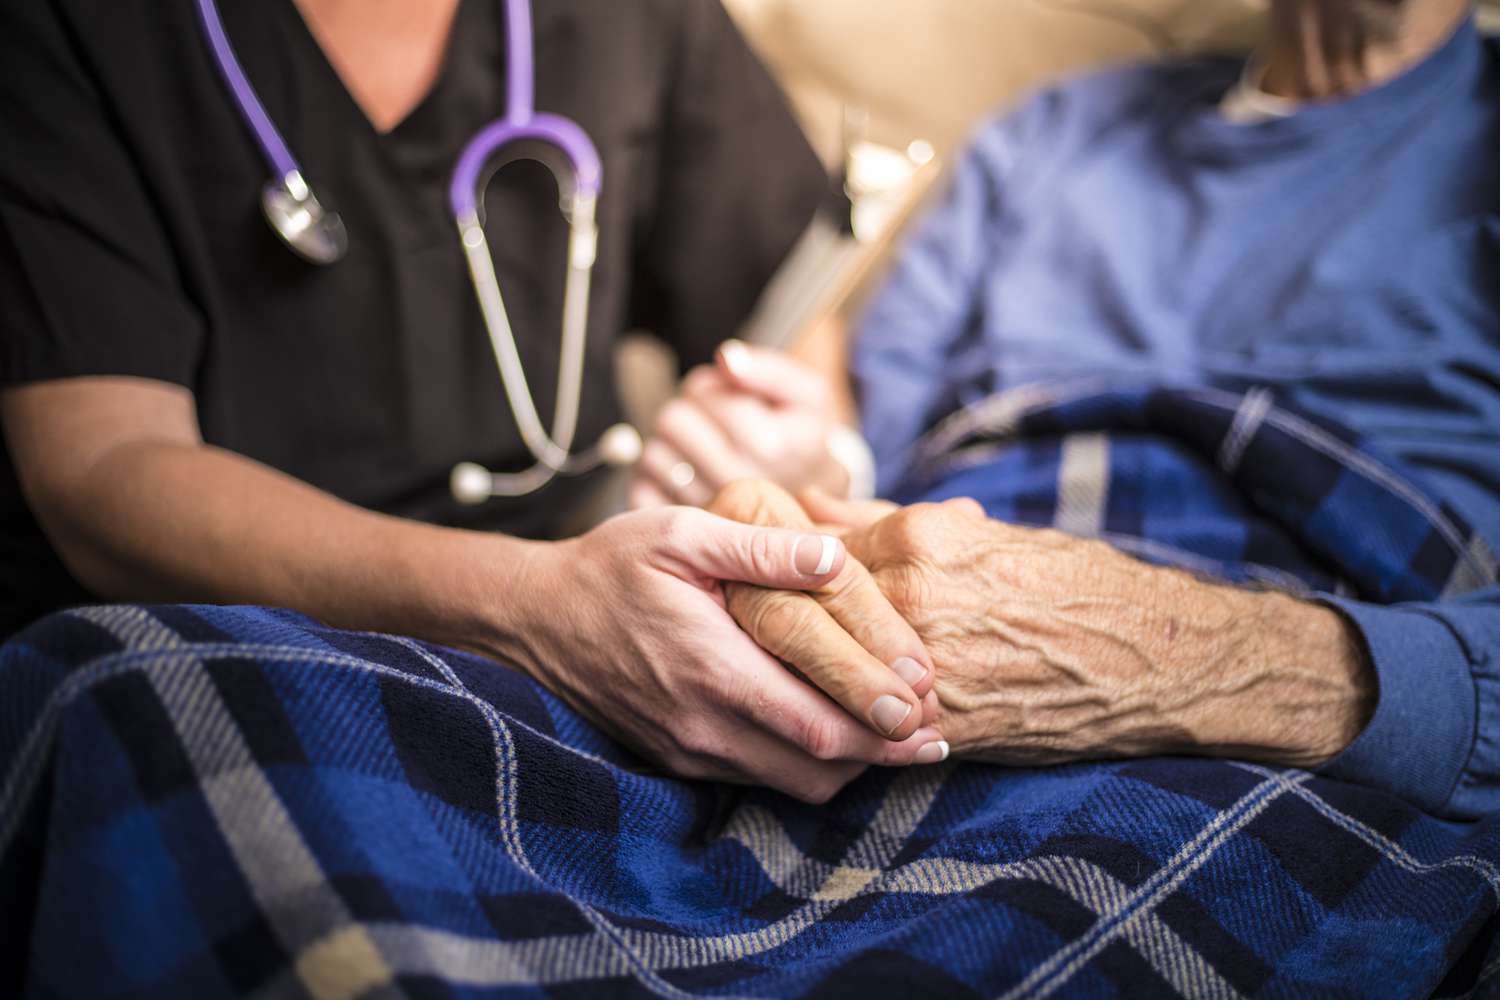 What services does Comfort Care Hospice provide?